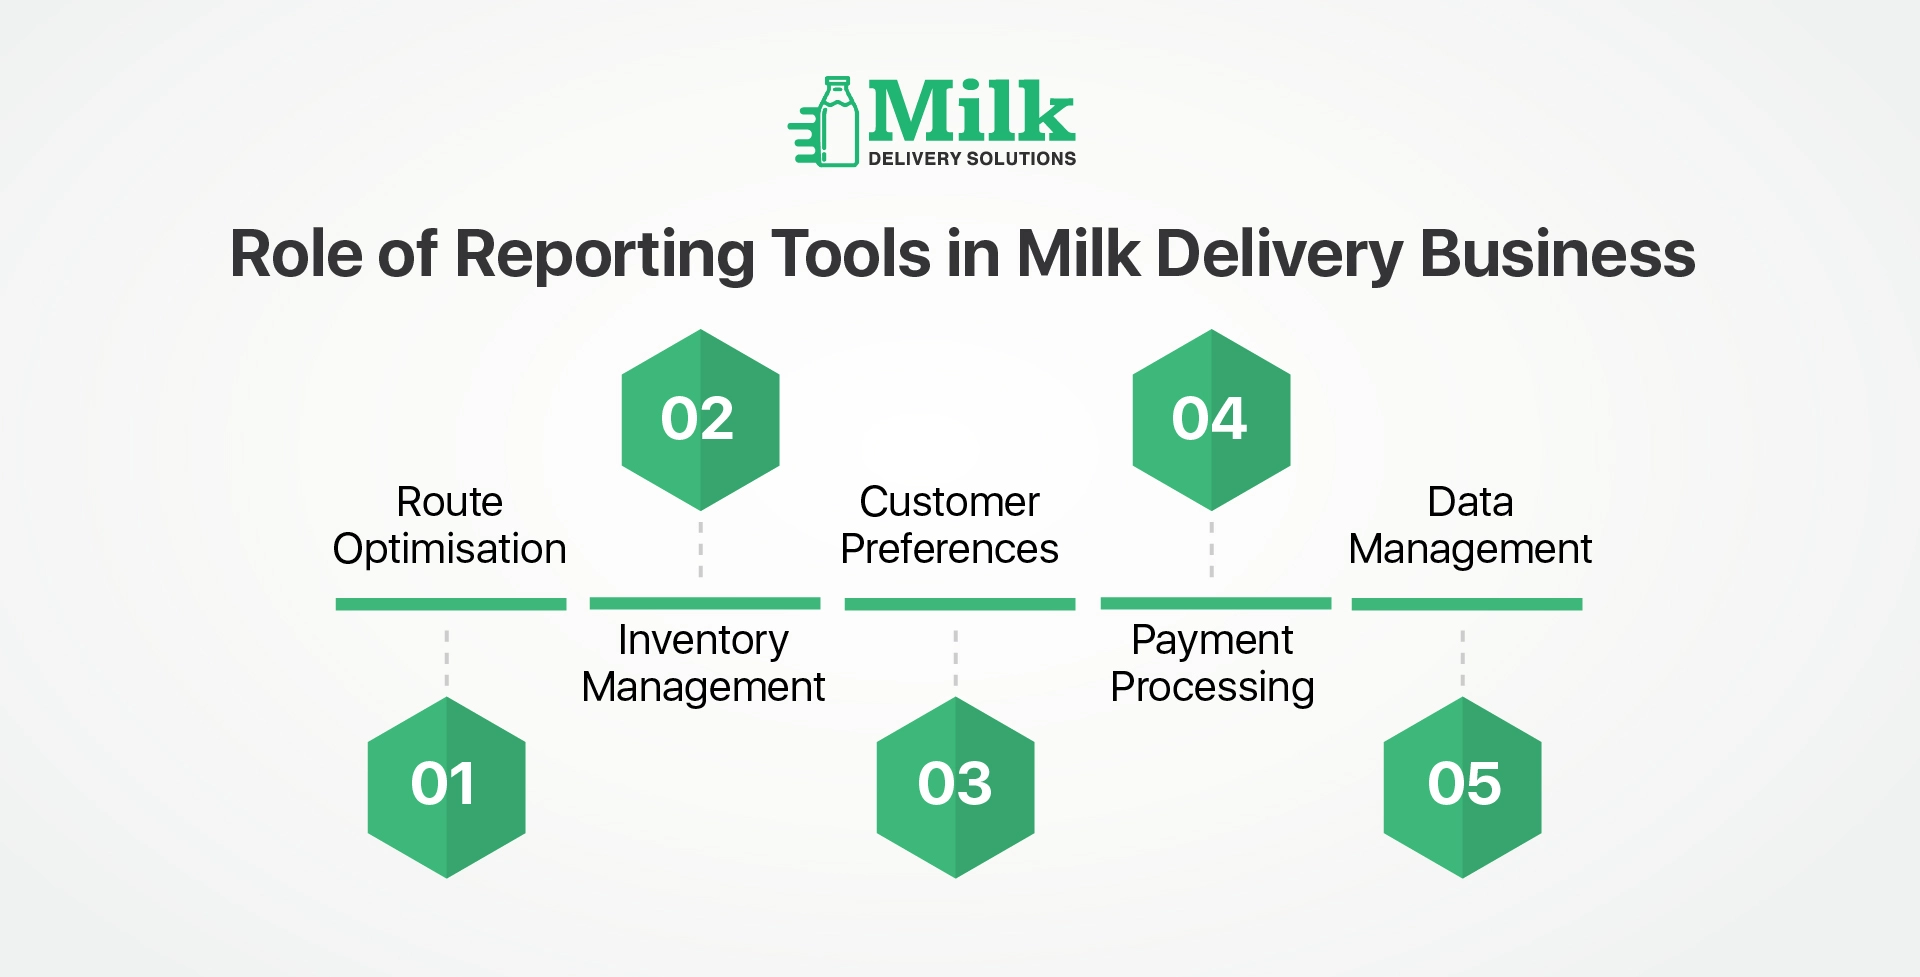 ravi garg, mds, role, reporting tool, milk delivery business, route optimisation, inventory management, customer preference, payment processing, data management